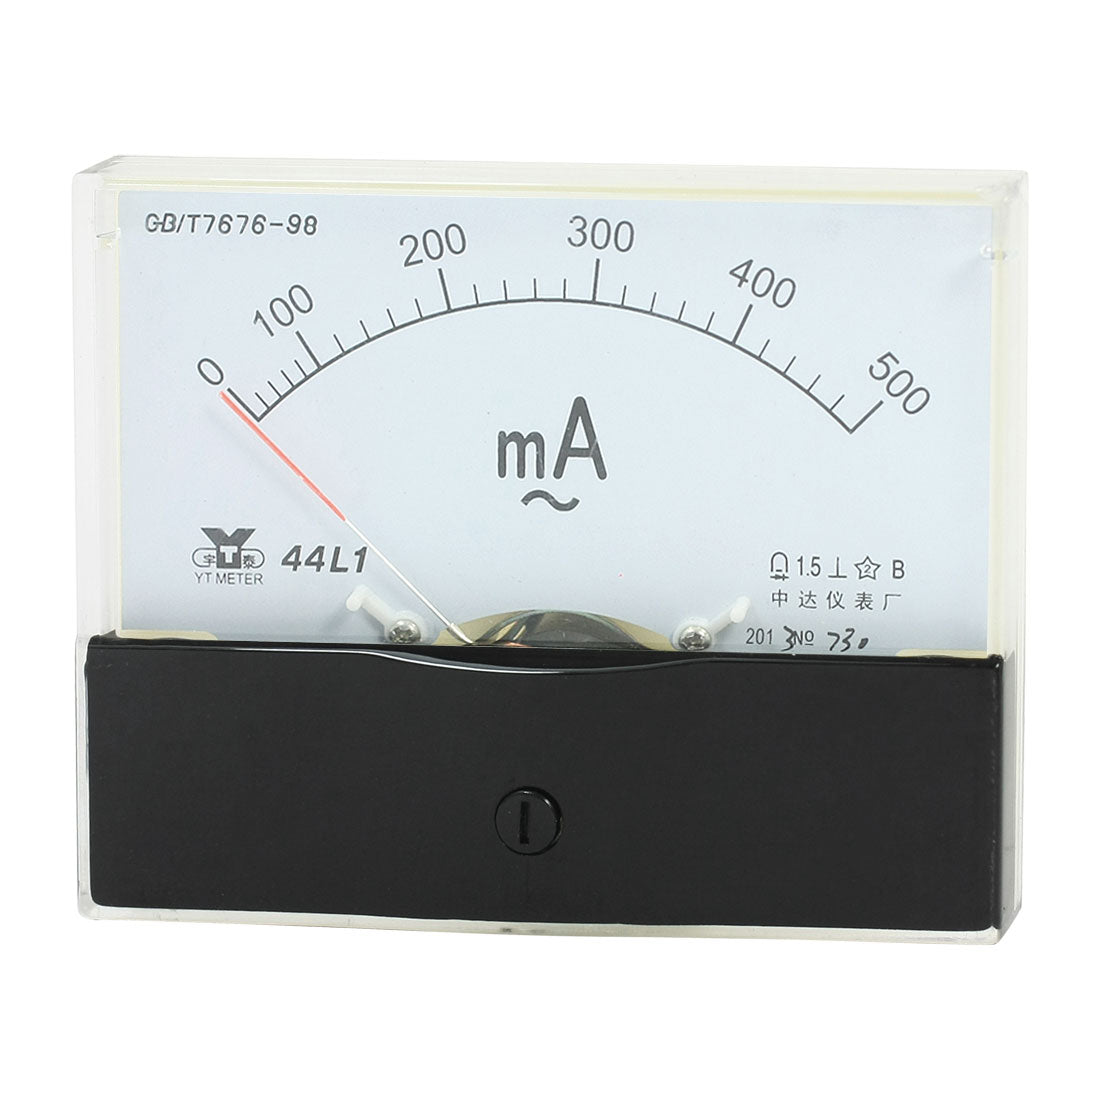 uxcell Uxcell Rectangle Measurement Tool Analog Panel Ammeter Gauge AC 0 - 500mA Measuring Range 44L1